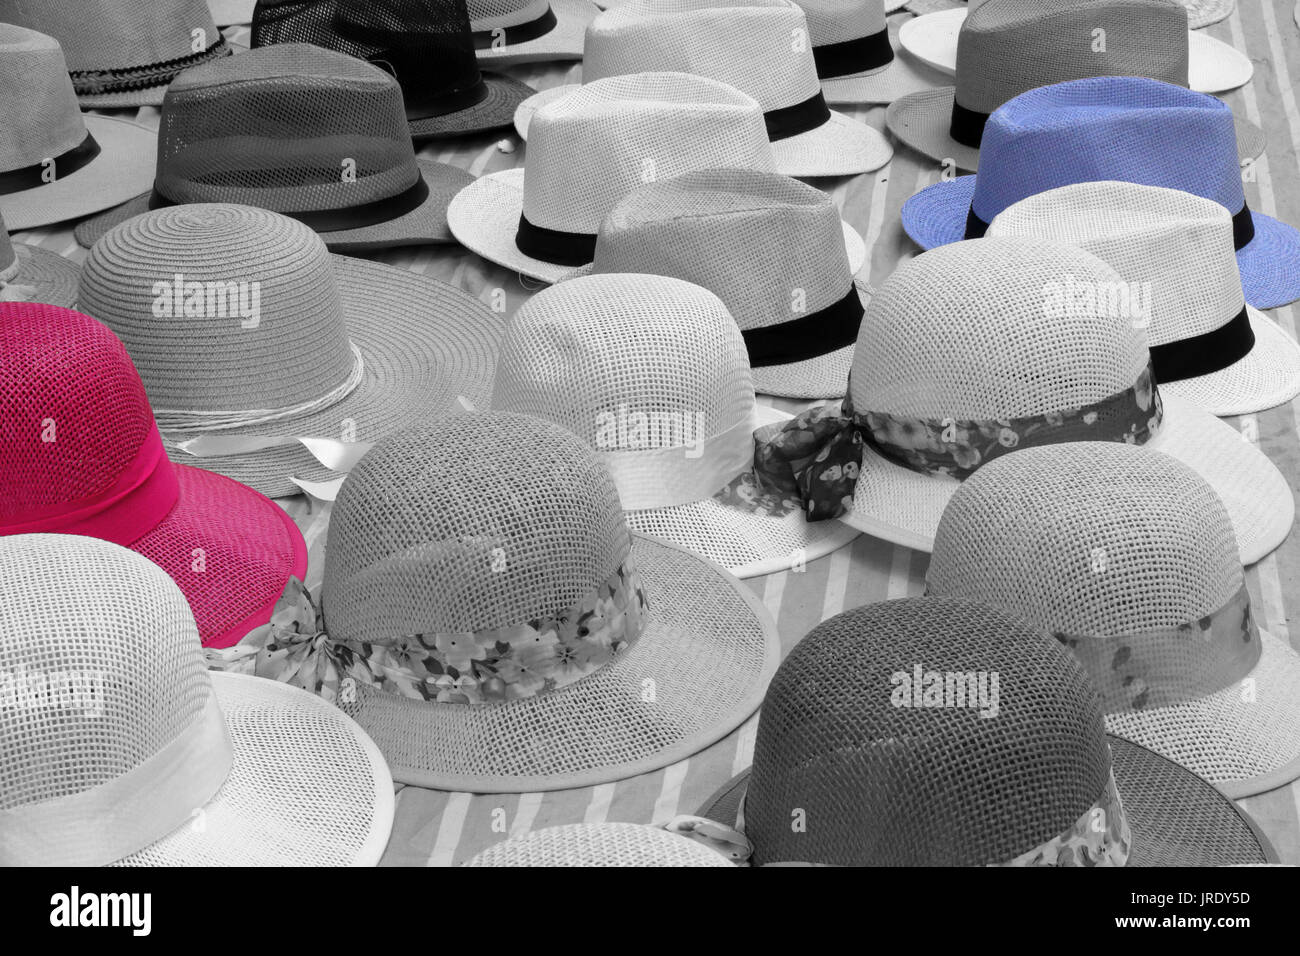 A close view of many Panama straw hats on a cotton sheet on sale on a street by a peddler. All black and white except one red hat and one blue hat Stock Photo